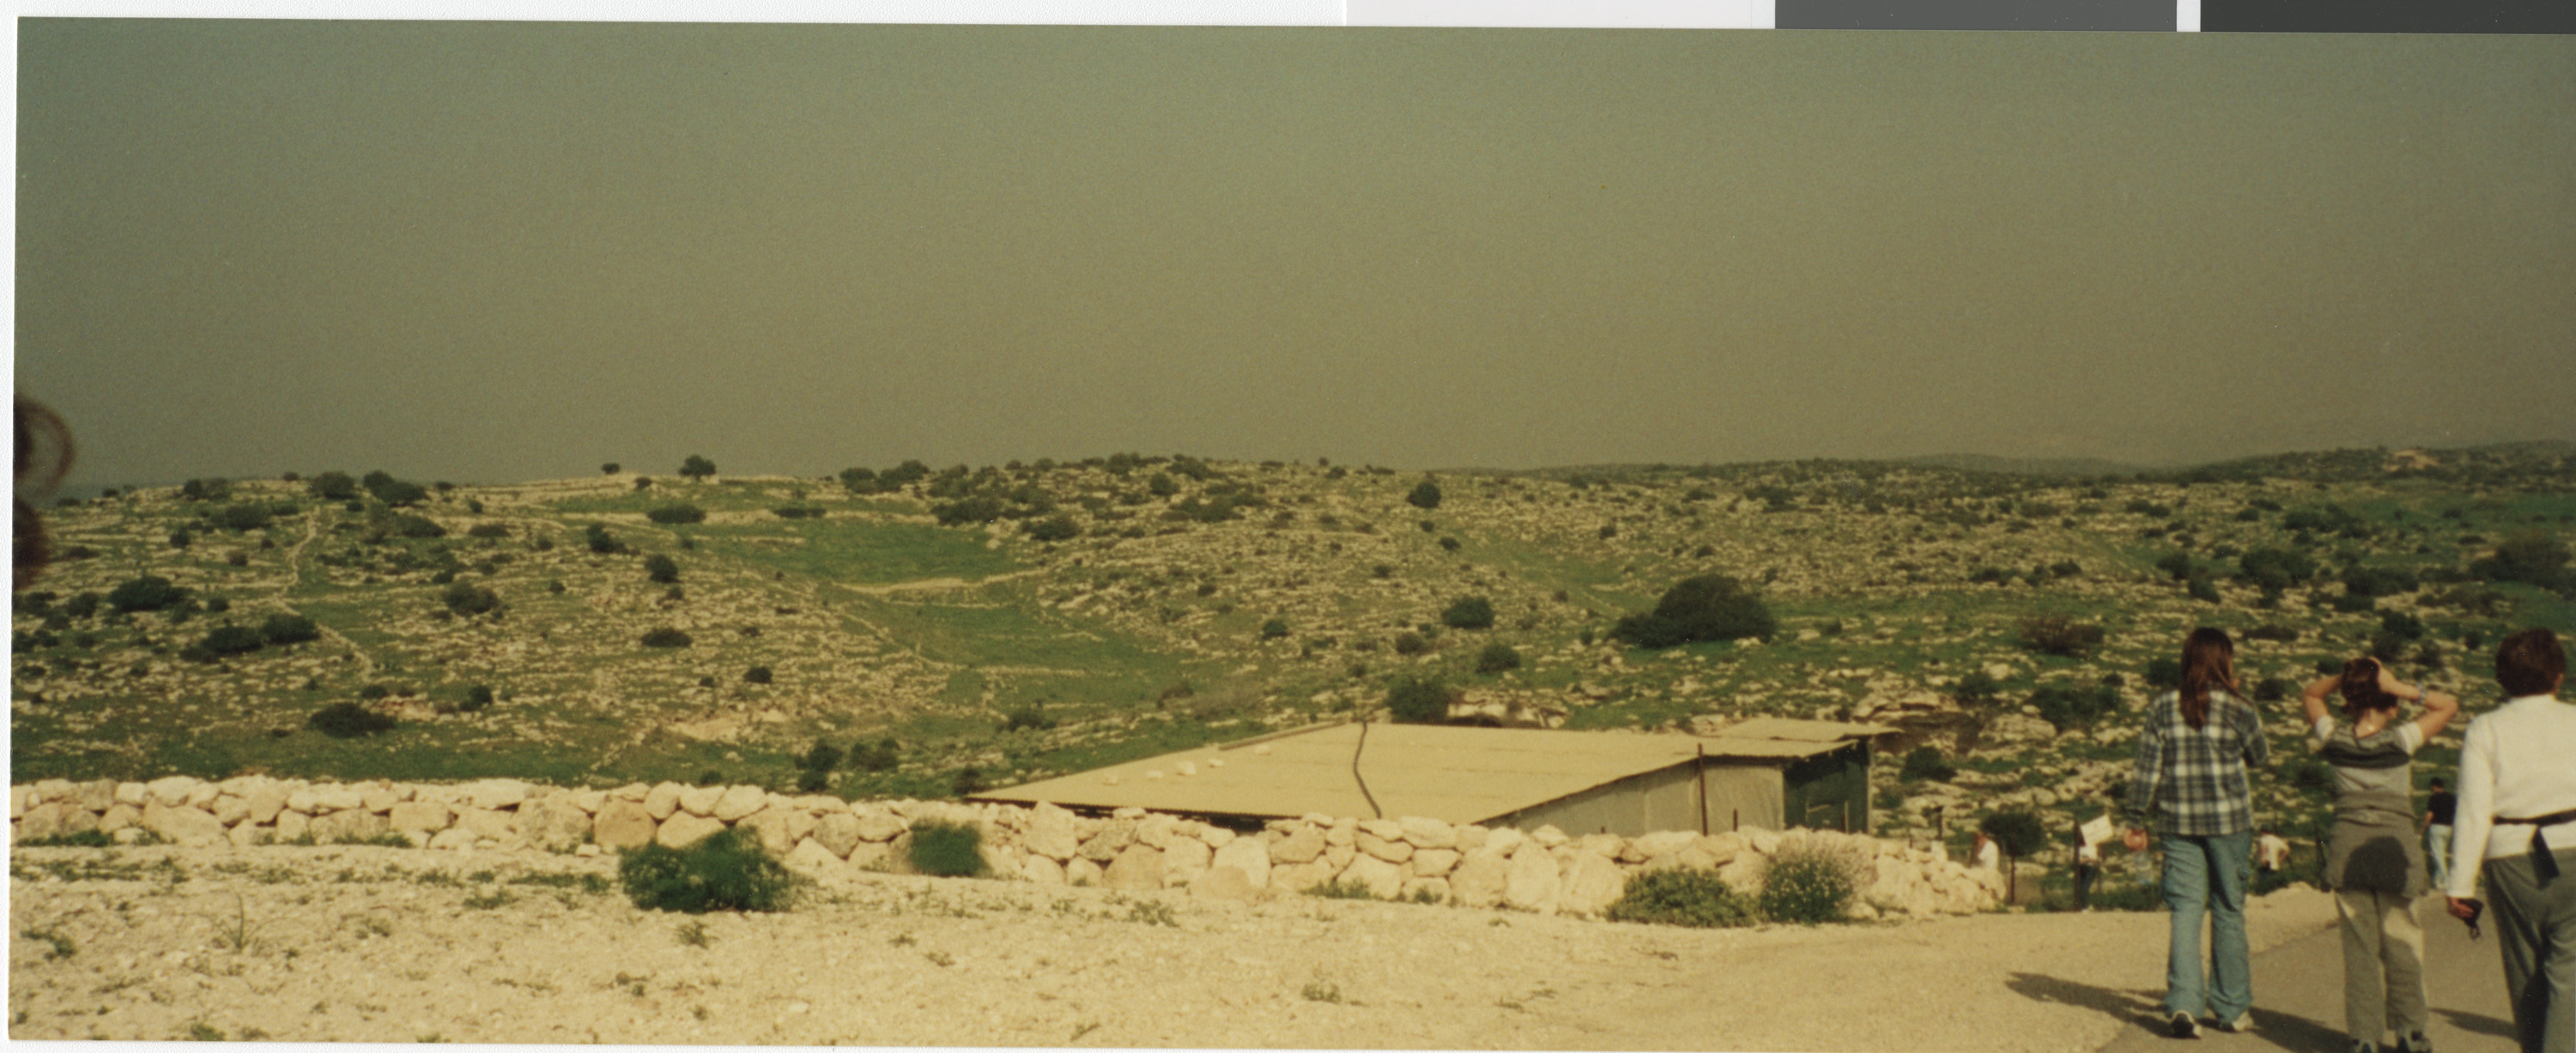 Photograph of a landscape in Israel